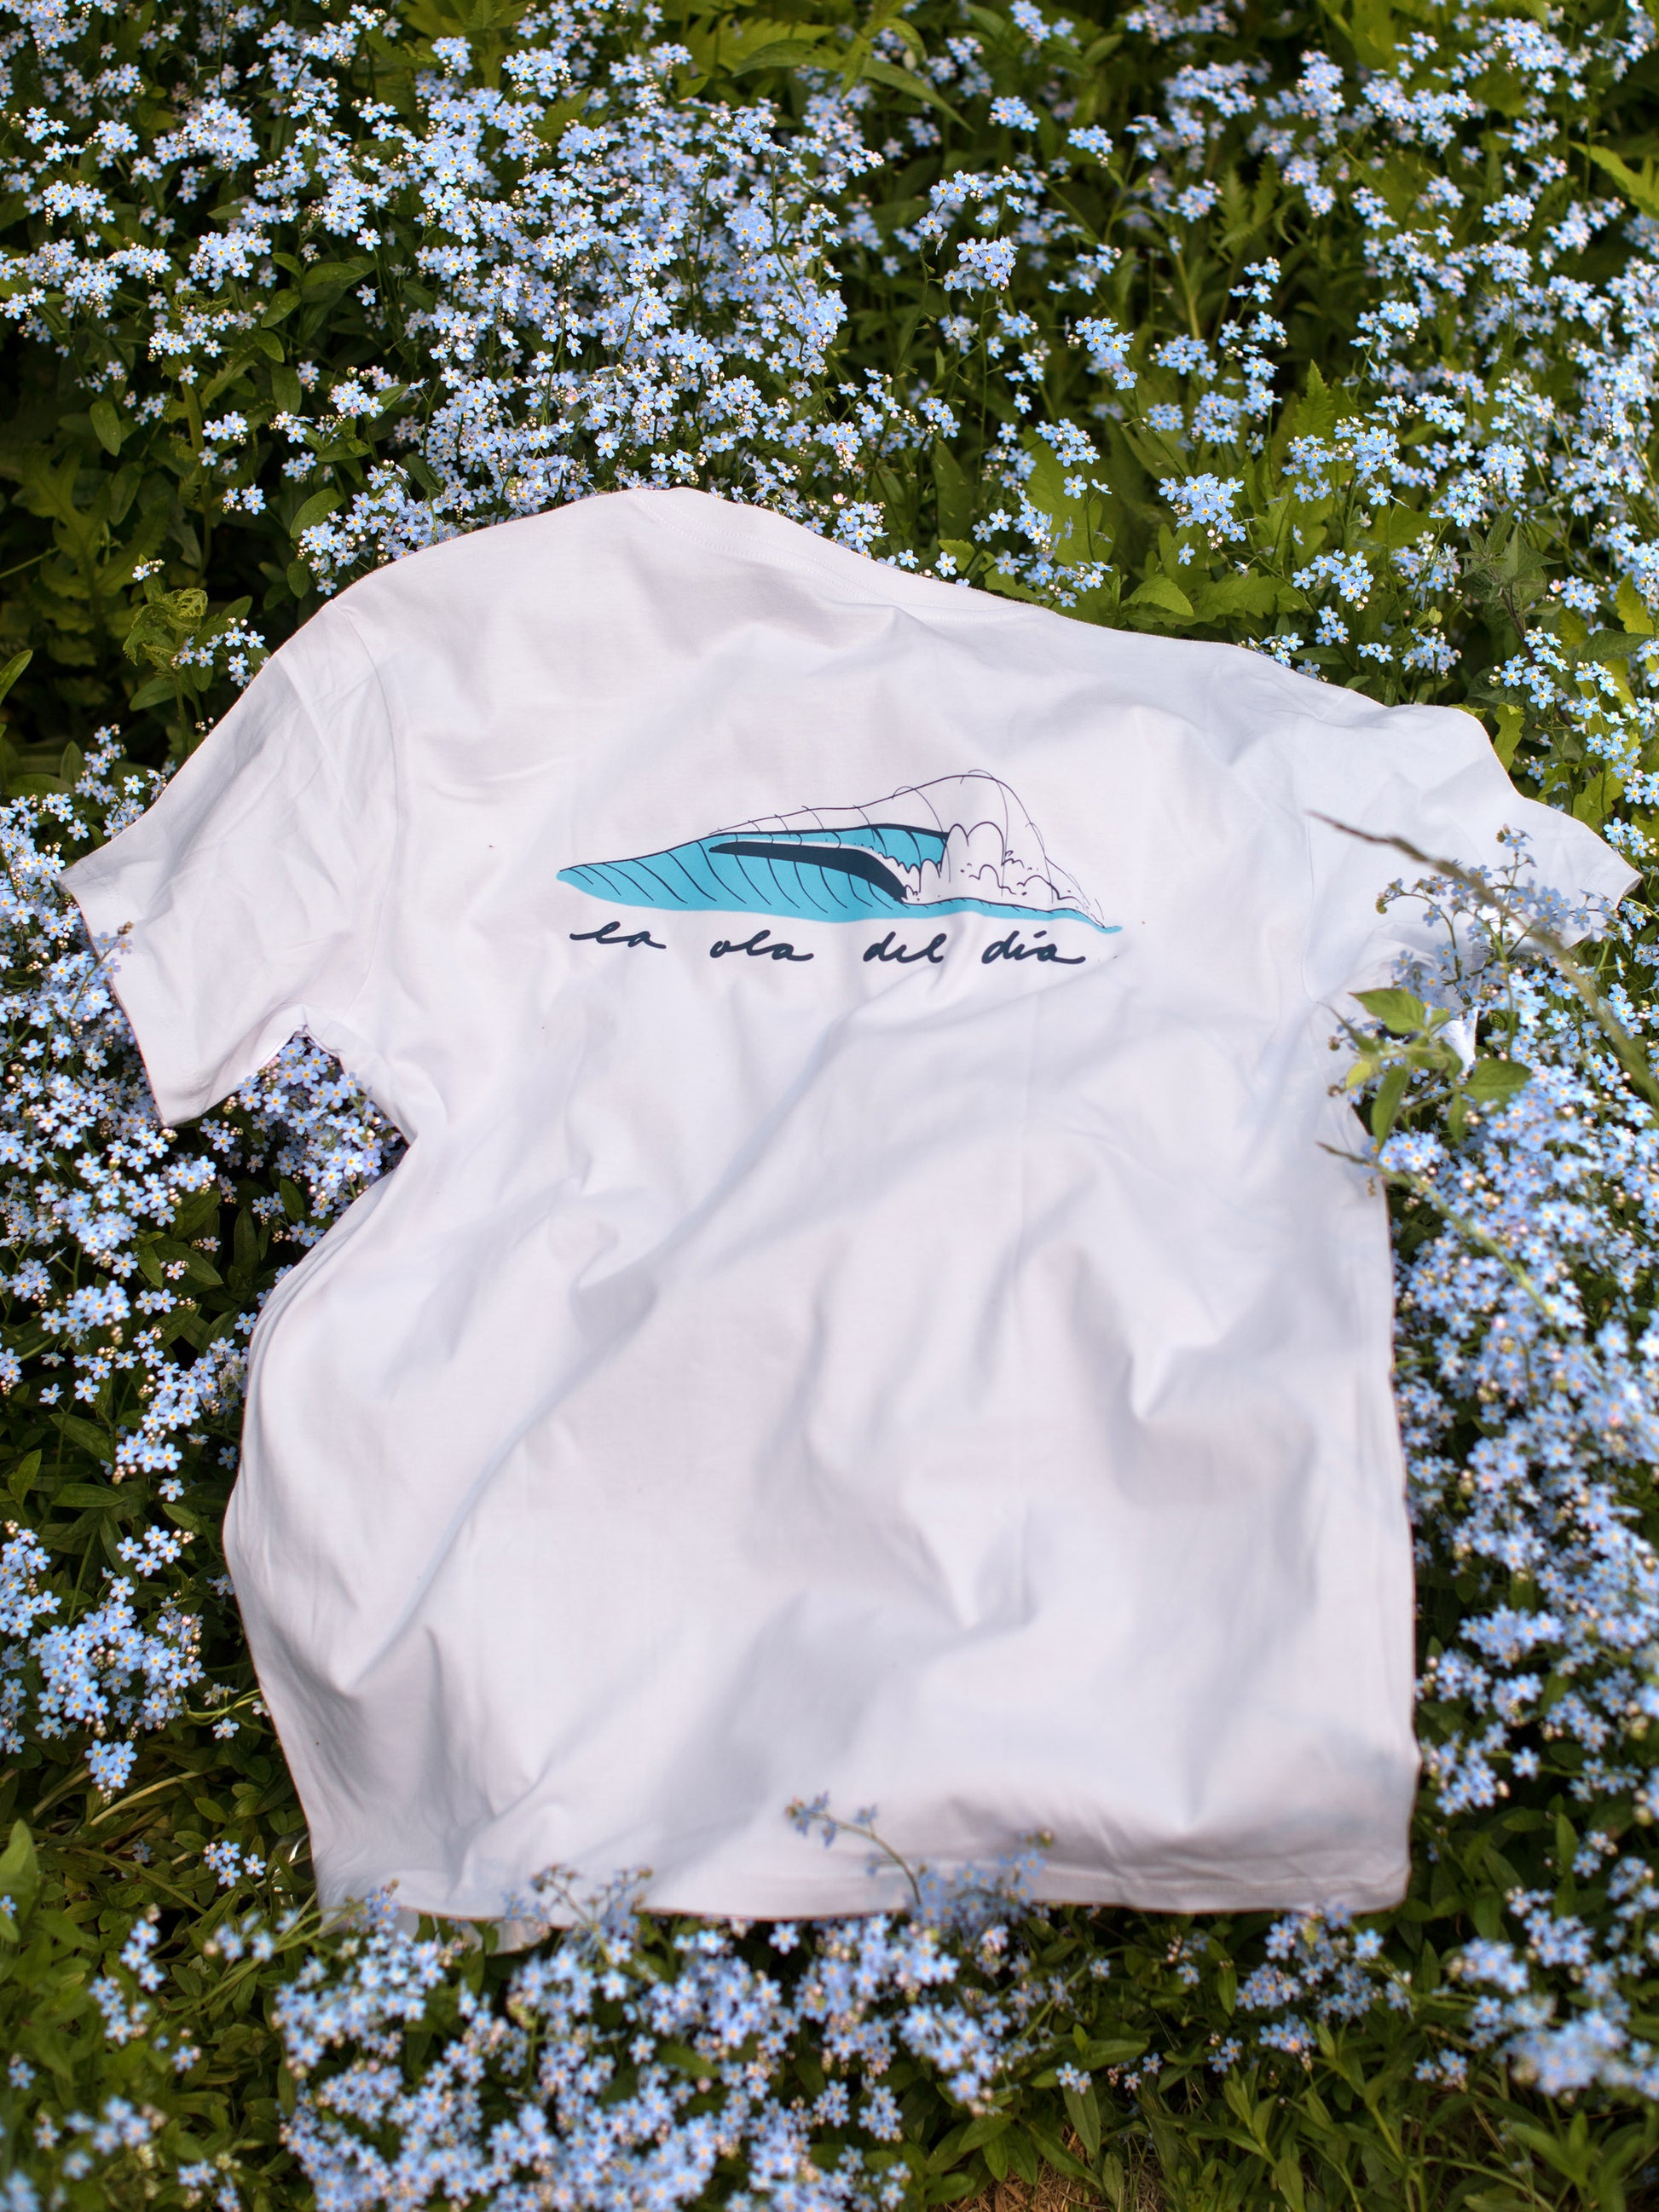 Back view of a white t-shirt with a large blue barrel wave design and text written in Spanish reading "la ola del día" (which means 'the wave of the day'), lying on a bed of small blue flowers.